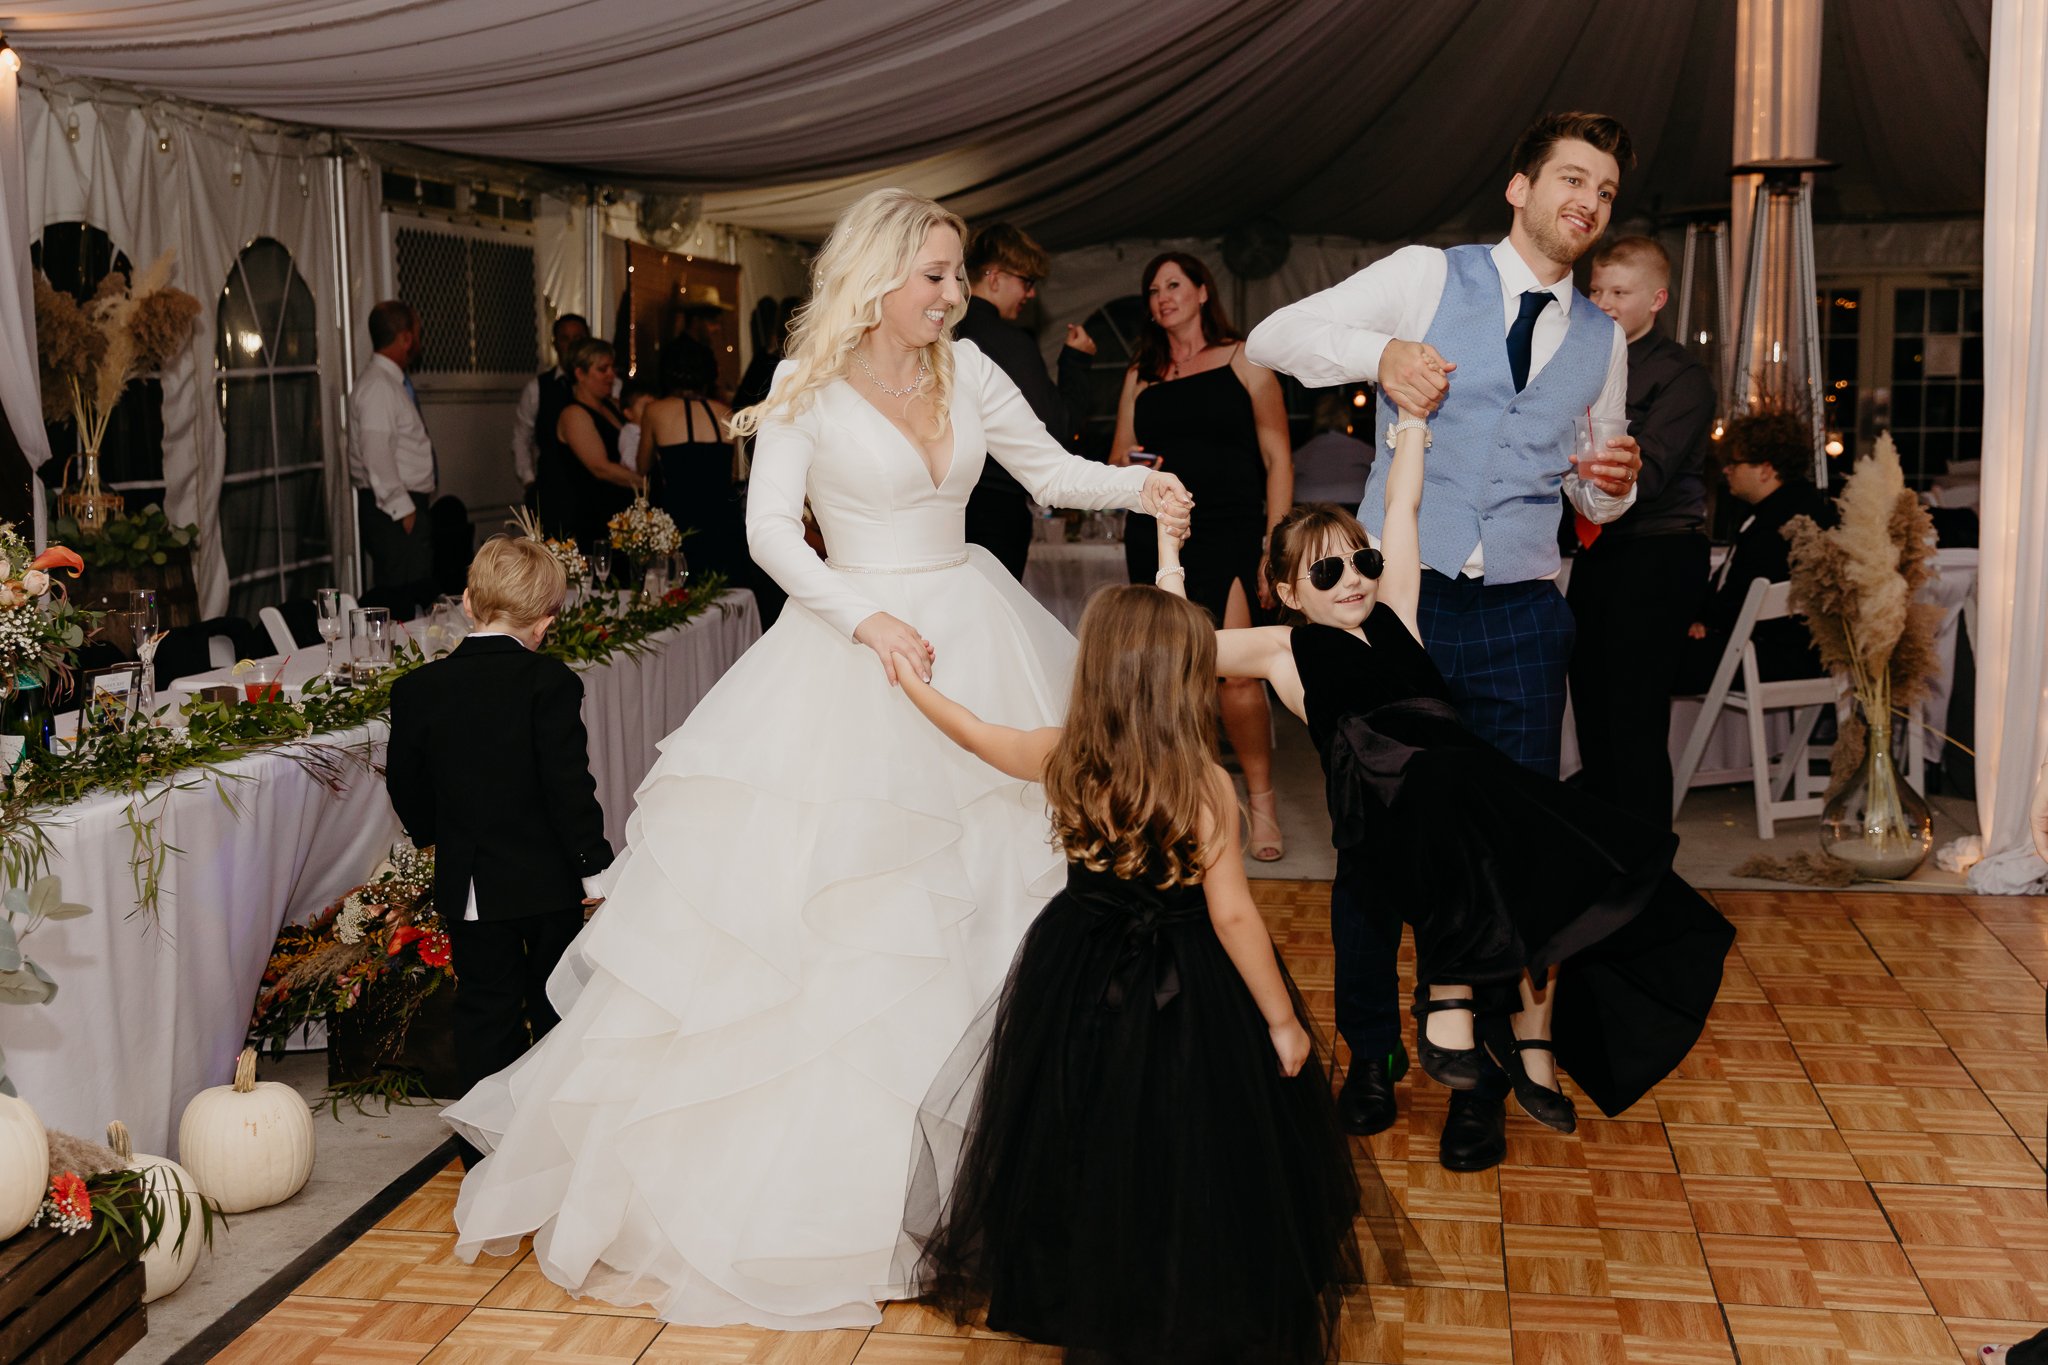 Wedding guests dancing and singing on the dancefloor together at a Northfork Farm Wedding